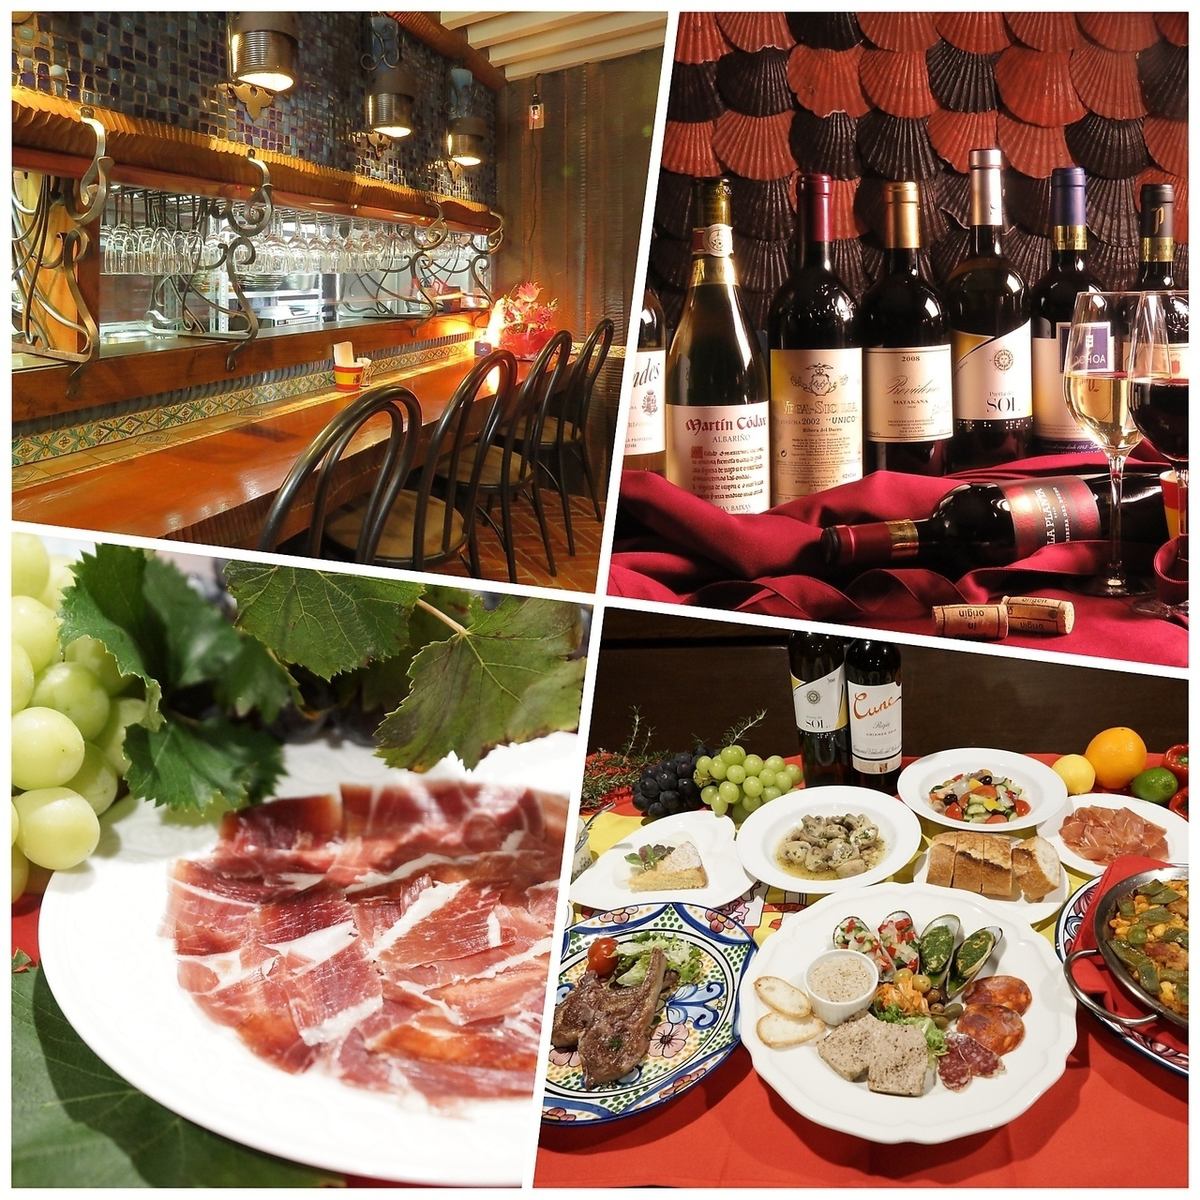 A restaurant where you can enjoy exquisite Spanish food and wine in a Spanish-style restaurant.